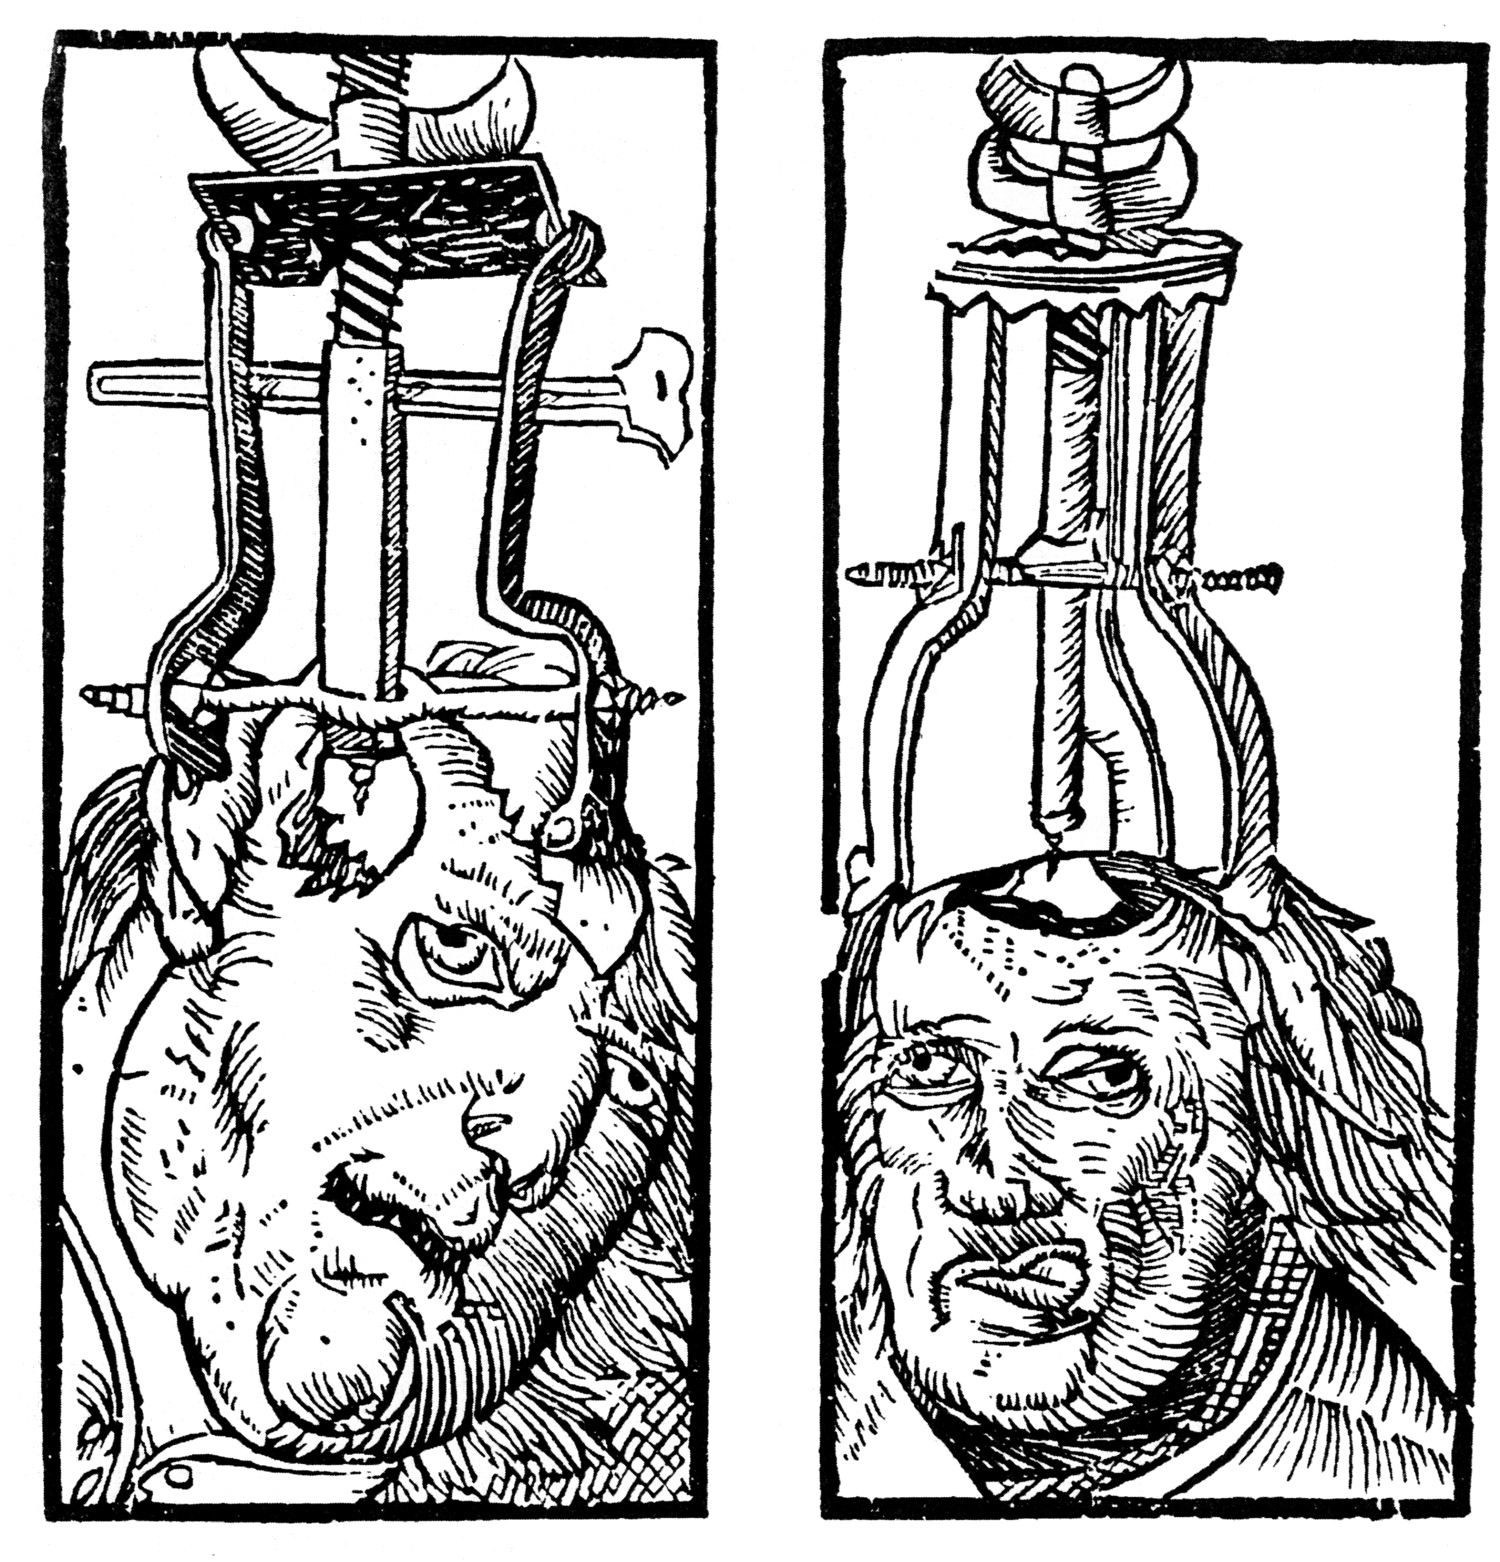 Trepanning: The procedure of drilling a hole into the skull to treat intracranial complications or any issues regarding the head. During the Medieval era, a sufferer of a mental disease was considered possessed by evil spirits and had to go through the procedure of trepanning. The procedure obviously extremely risky, and patients hardly ever survived. But there were some records of "successful" trepanning in which people lived with a new soft spot.